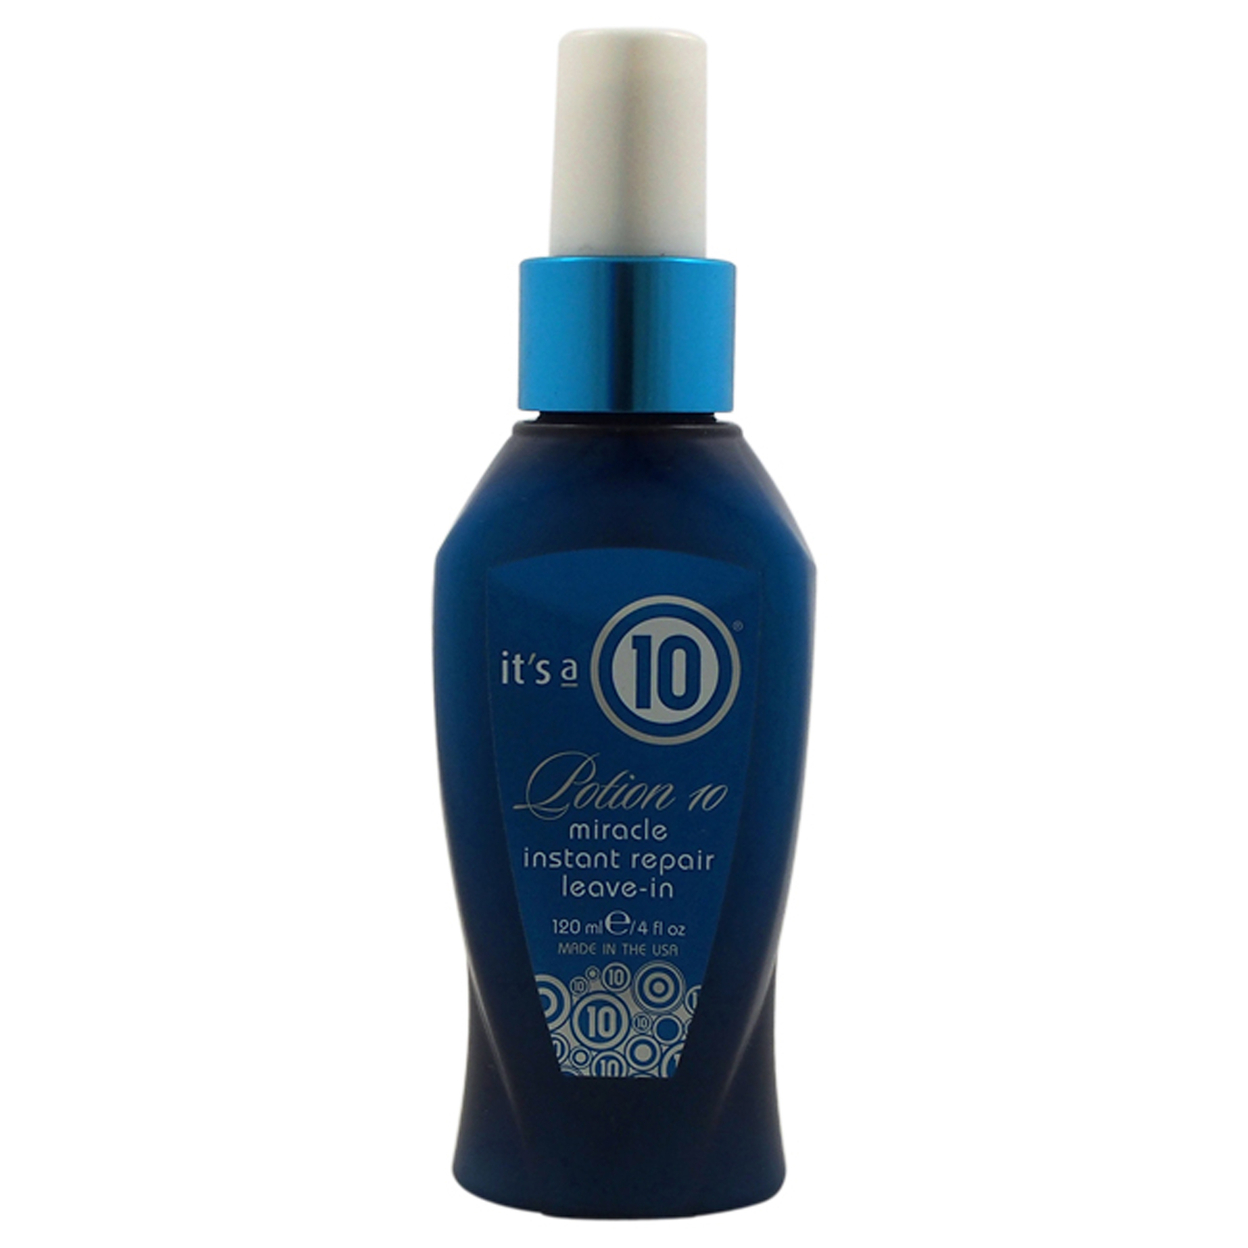 It's A 10 Potion 10 Miracle Instant Repair Leave-In Treatment Treatment 4 Oz